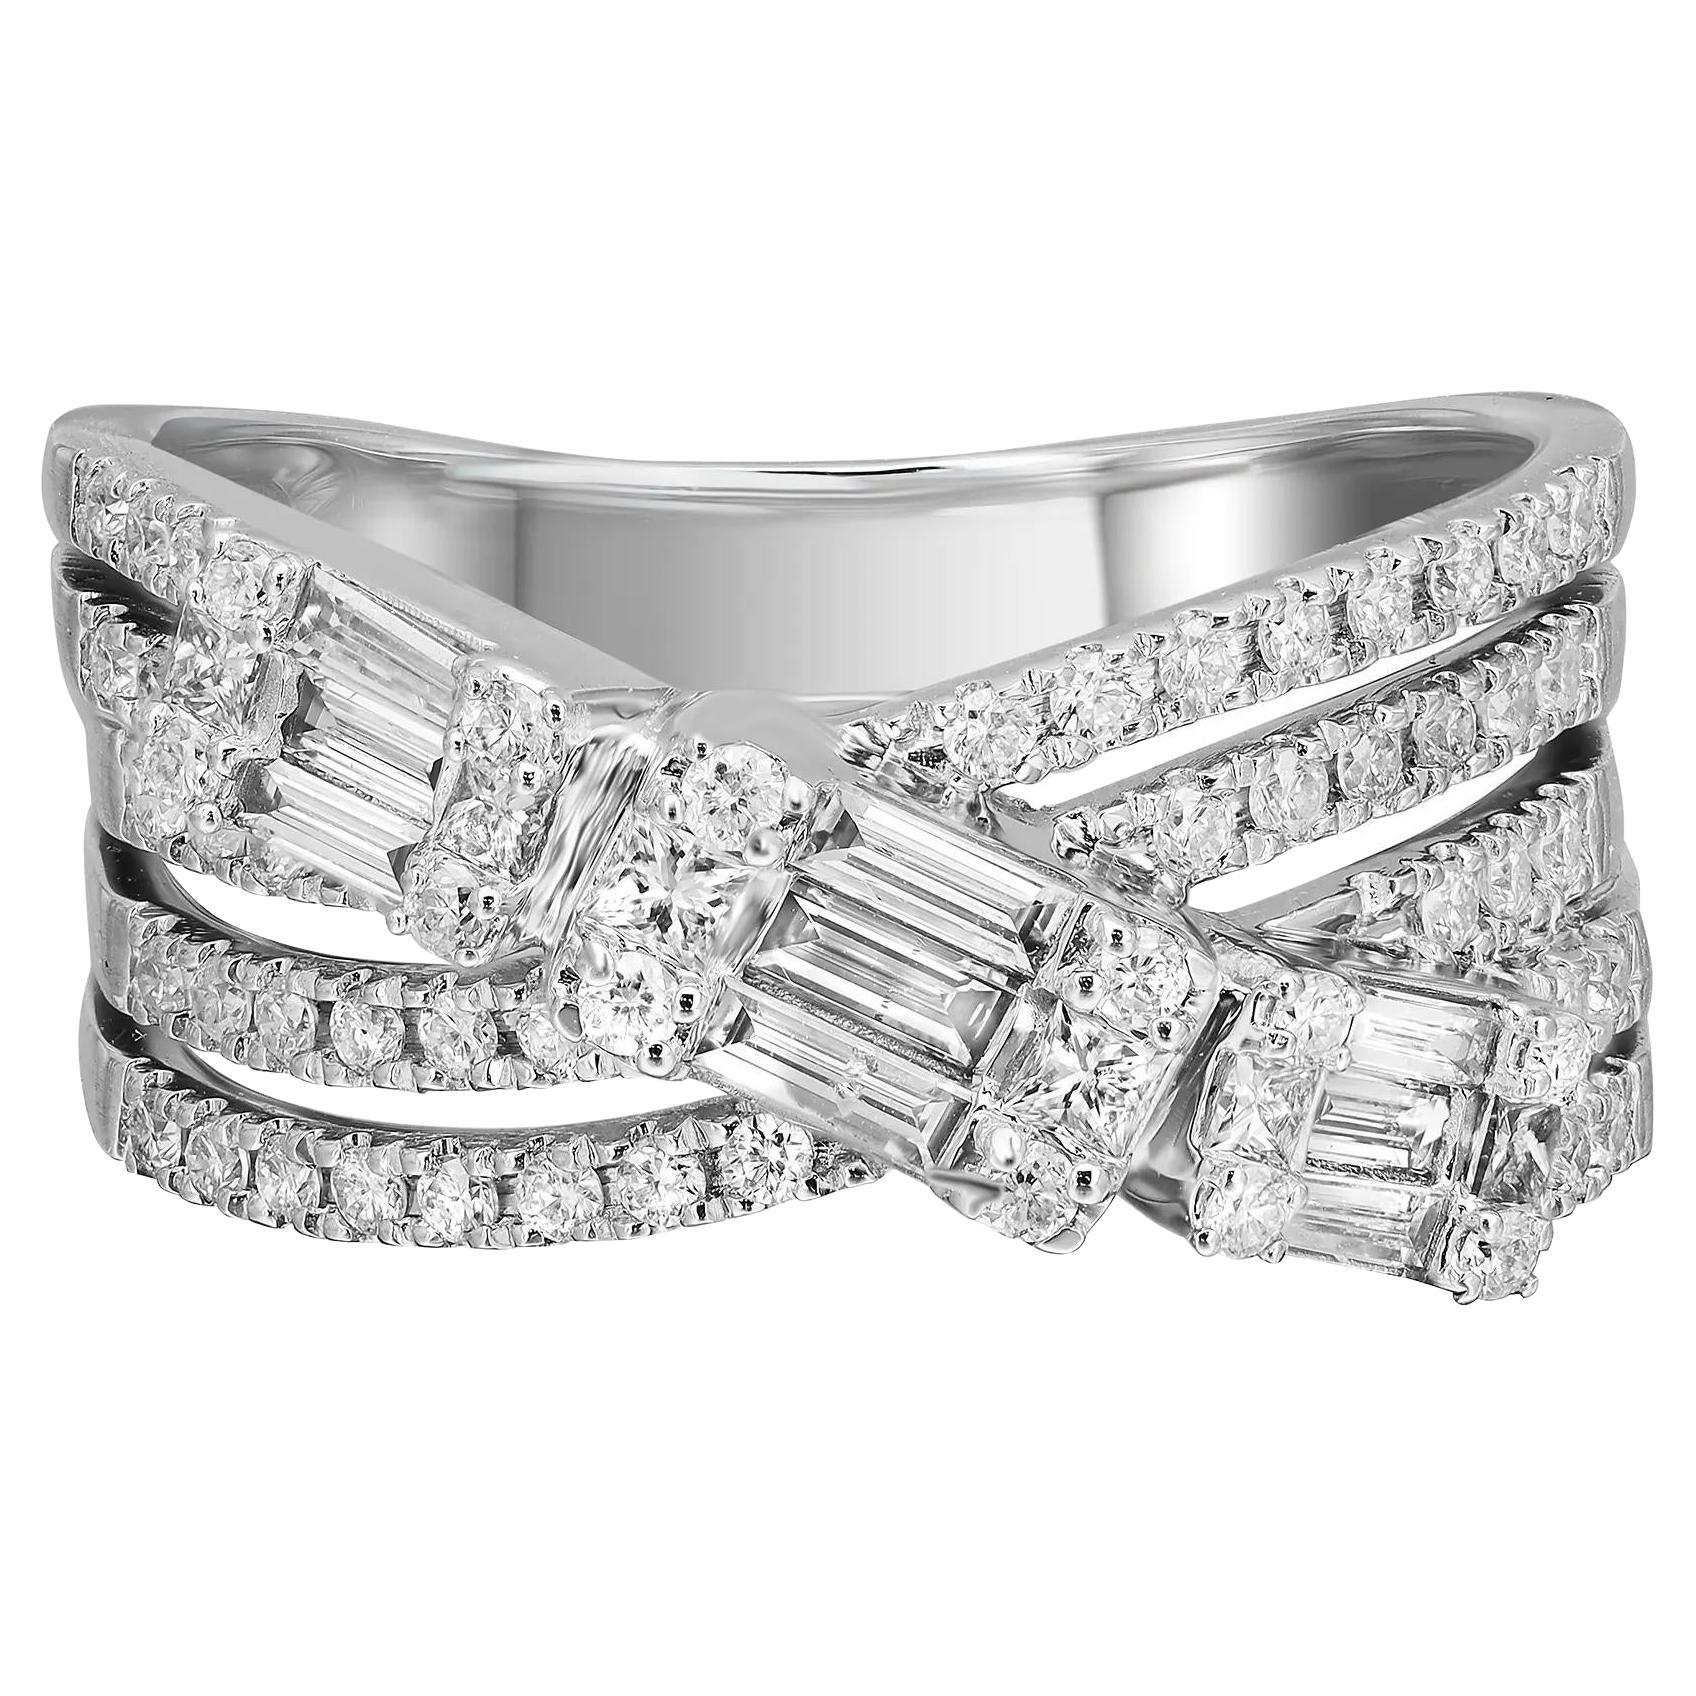 Diamond Ring Round & Baguette Cut 14K White Gold 0.75Cttw For Sale